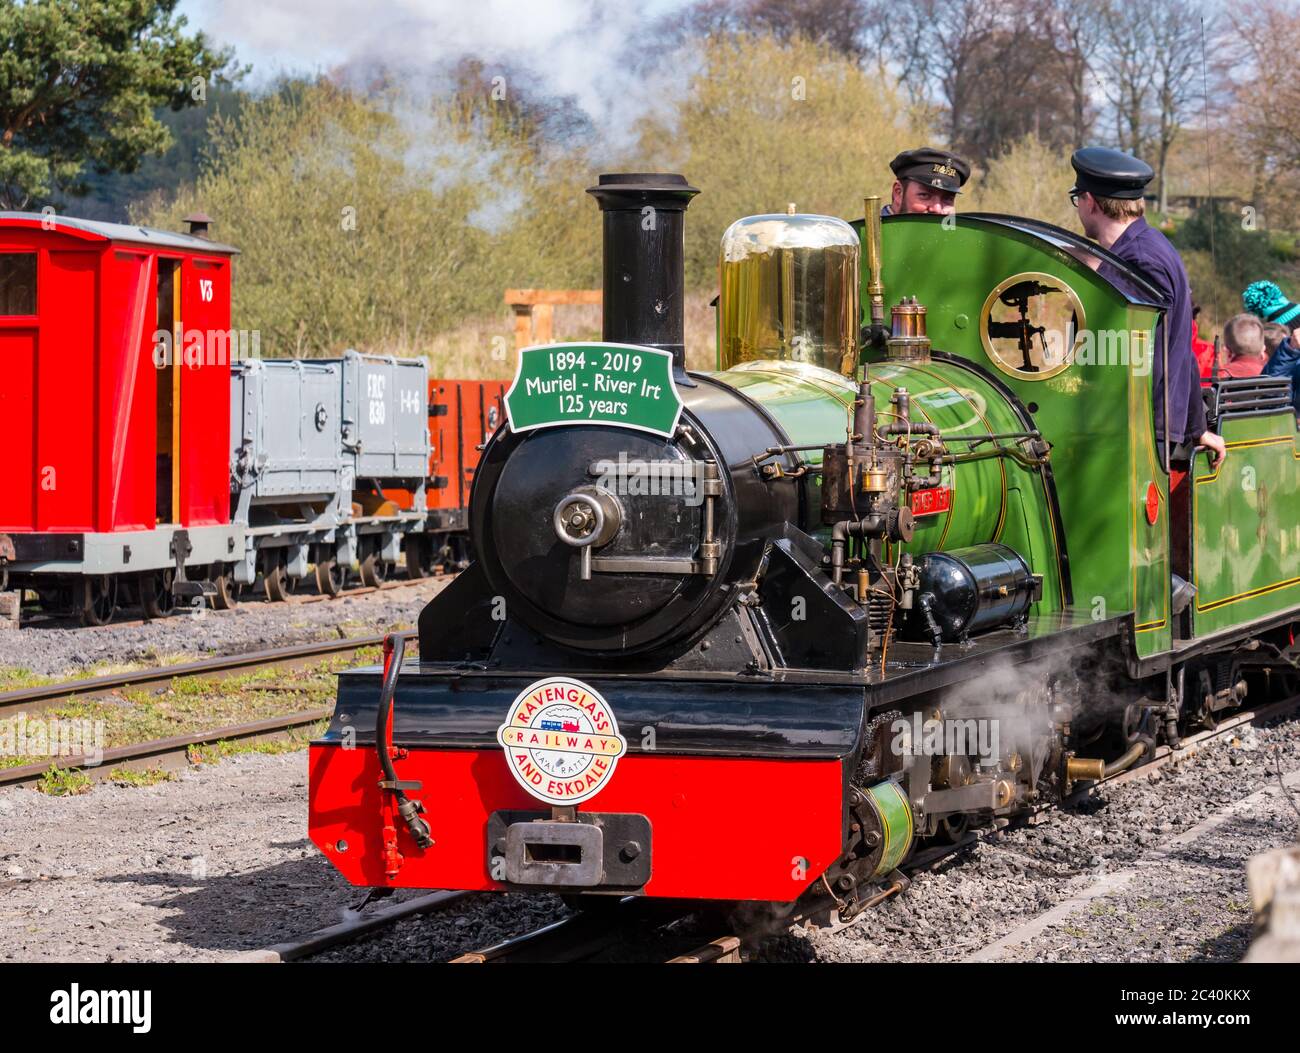 Steam Train Drivers High Resolution Stock Photography and Images - Alamy